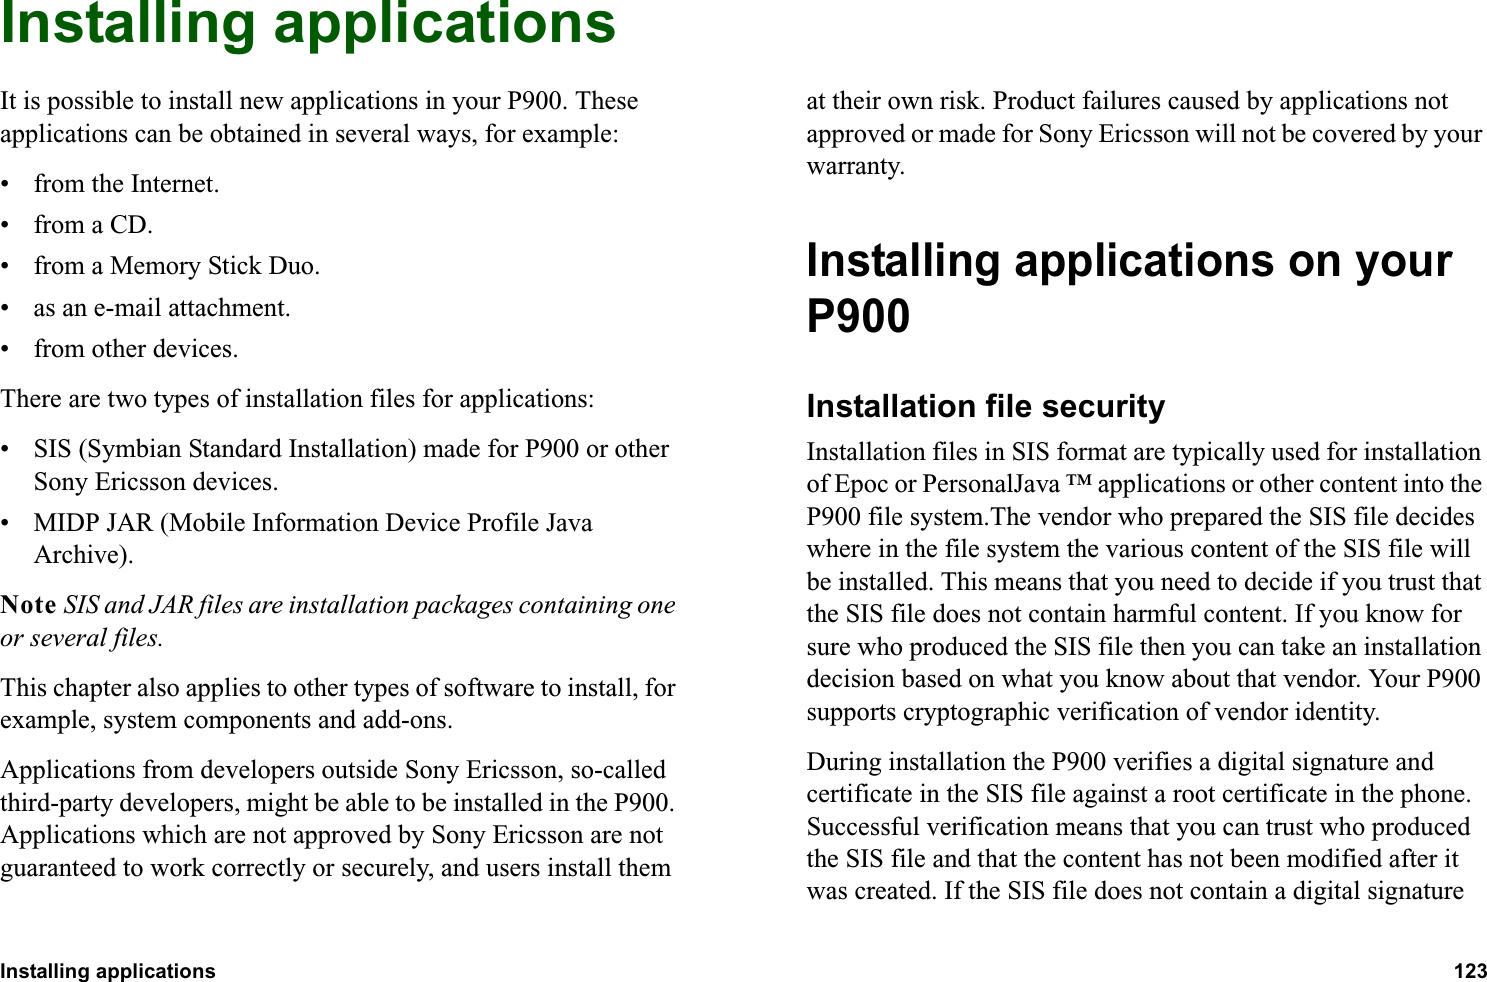 Installing applications 123  Installing applicationsIt is possible to install new applications in your P900. These applications can be obtained in several ways, for example:• from the Internet.•from a CD.• from a Memory Stick Duo.• as an e-mail attachment.• from other devices.There are two types of installation files for applications:• SIS (Symbian Standard Installation) made for P900 or other Sony Ericsson devices.• MIDP JAR (Mobile Information Device Profile Java Archive).Note SIS and JAR files are installation packages containing one or several files.This chapter also applies to other types of software to install, for example, system components and add-ons.Applications from developers outside Sony Ericsson, so-called third-party developers, might be able to be installed in the P900. Applications which are not approved by Sony Ericsson are not guaranteed to work correctly or securely, and users install them at their own risk. Product failures caused by applications not approved or made for Sony Ericsson will not be covered by your warranty.Installing applications on your P900Installation file securityInstallation files in SIS format are typically used for installation of Epoc or PersonalJava ™ applications or other content into the P900 file system.The vendor who prepared the SIS file decides where in the file system the various content of the SIS file will be installed. This means that you need to decide if you trust that the SIS file does not contain harmful content. If you know for sure who produced the SIS file then you can take an installation decision based on what you know about that vendor. Your P900 supports cryptographic verification of vendor identity.During installation the P900 verifies a digital signature and certificate in the SIS file against a root certificate in the phone. Successful verification means that you can trust who produced the SIS file and that the content has not been modified after it was created. If the SIS file does not contain a digital signature 